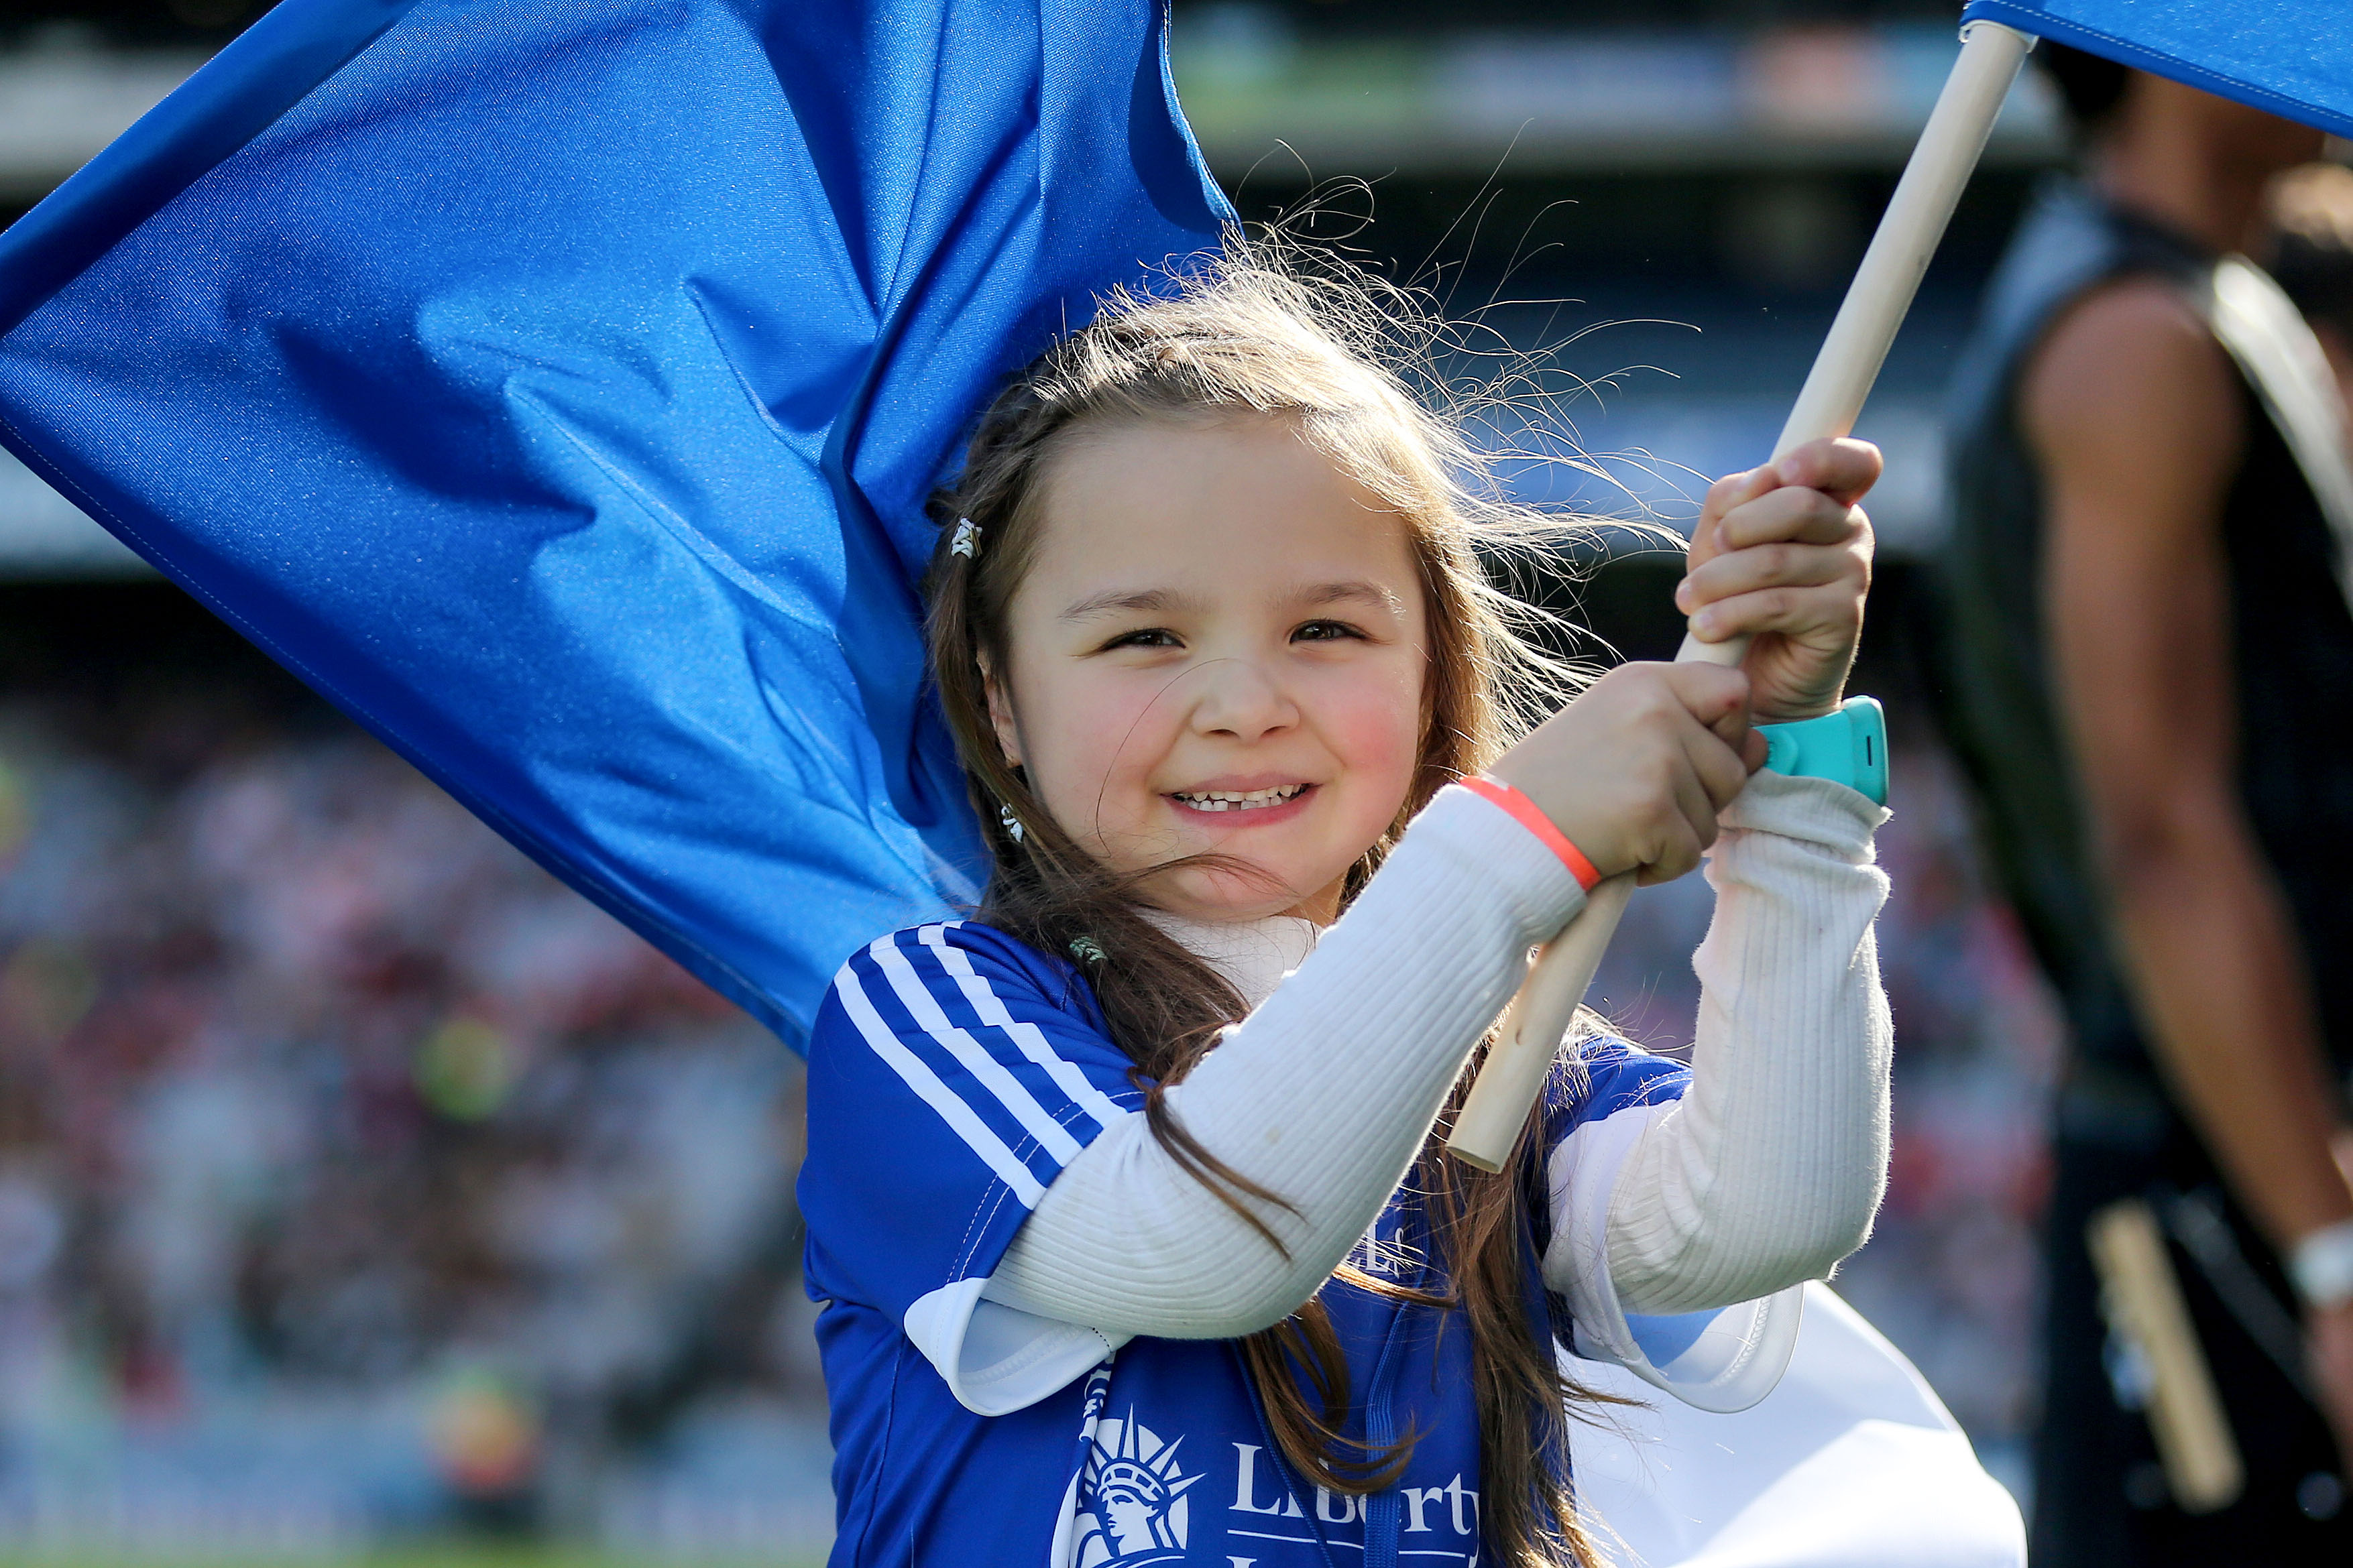 WIN the chance to have your child bear the flag at the All-Ireland Camogie Final